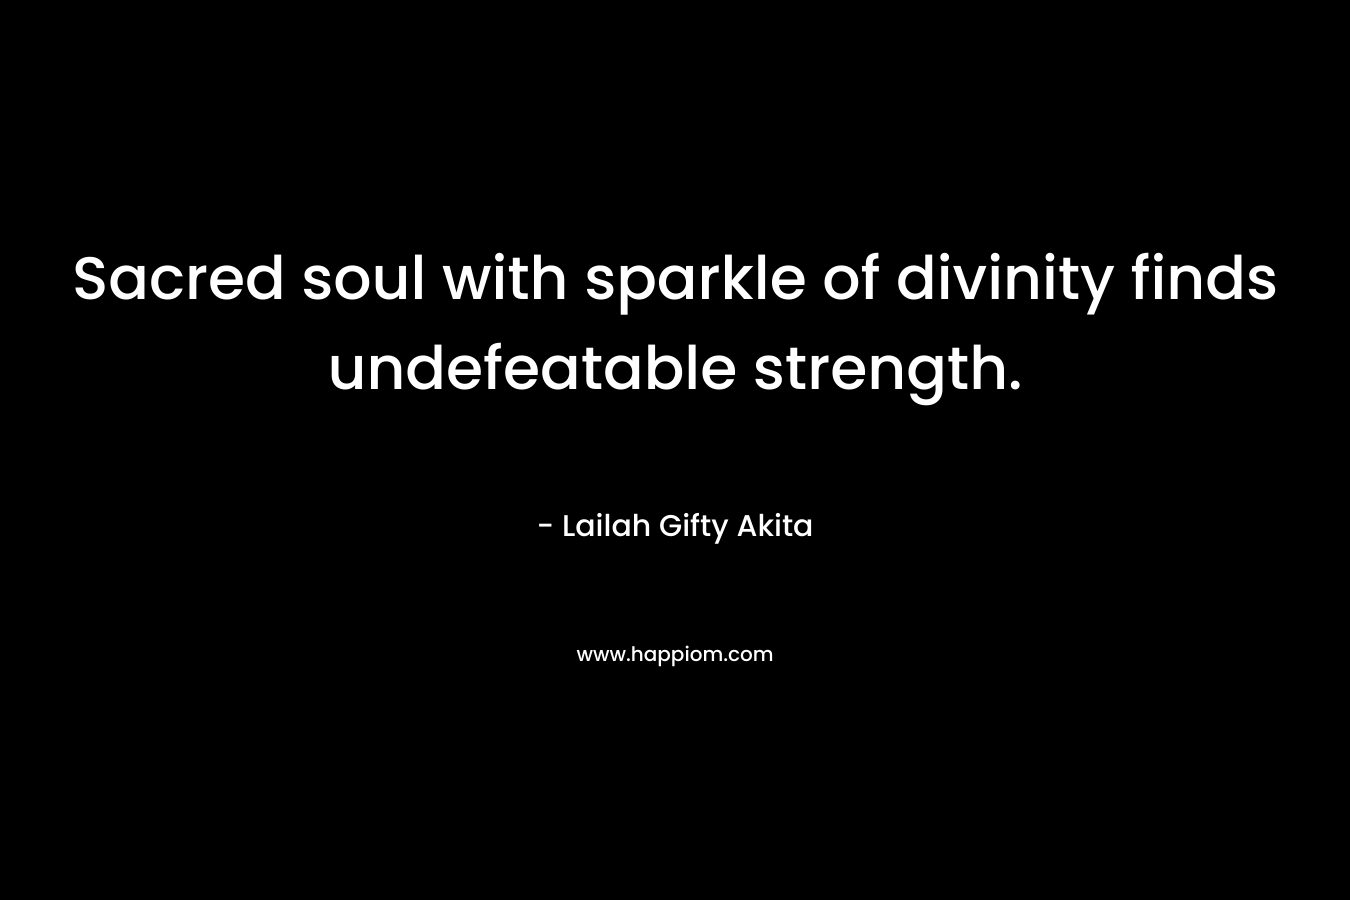 Sacred soul with sparkle of divinity finds undefeatable strength.